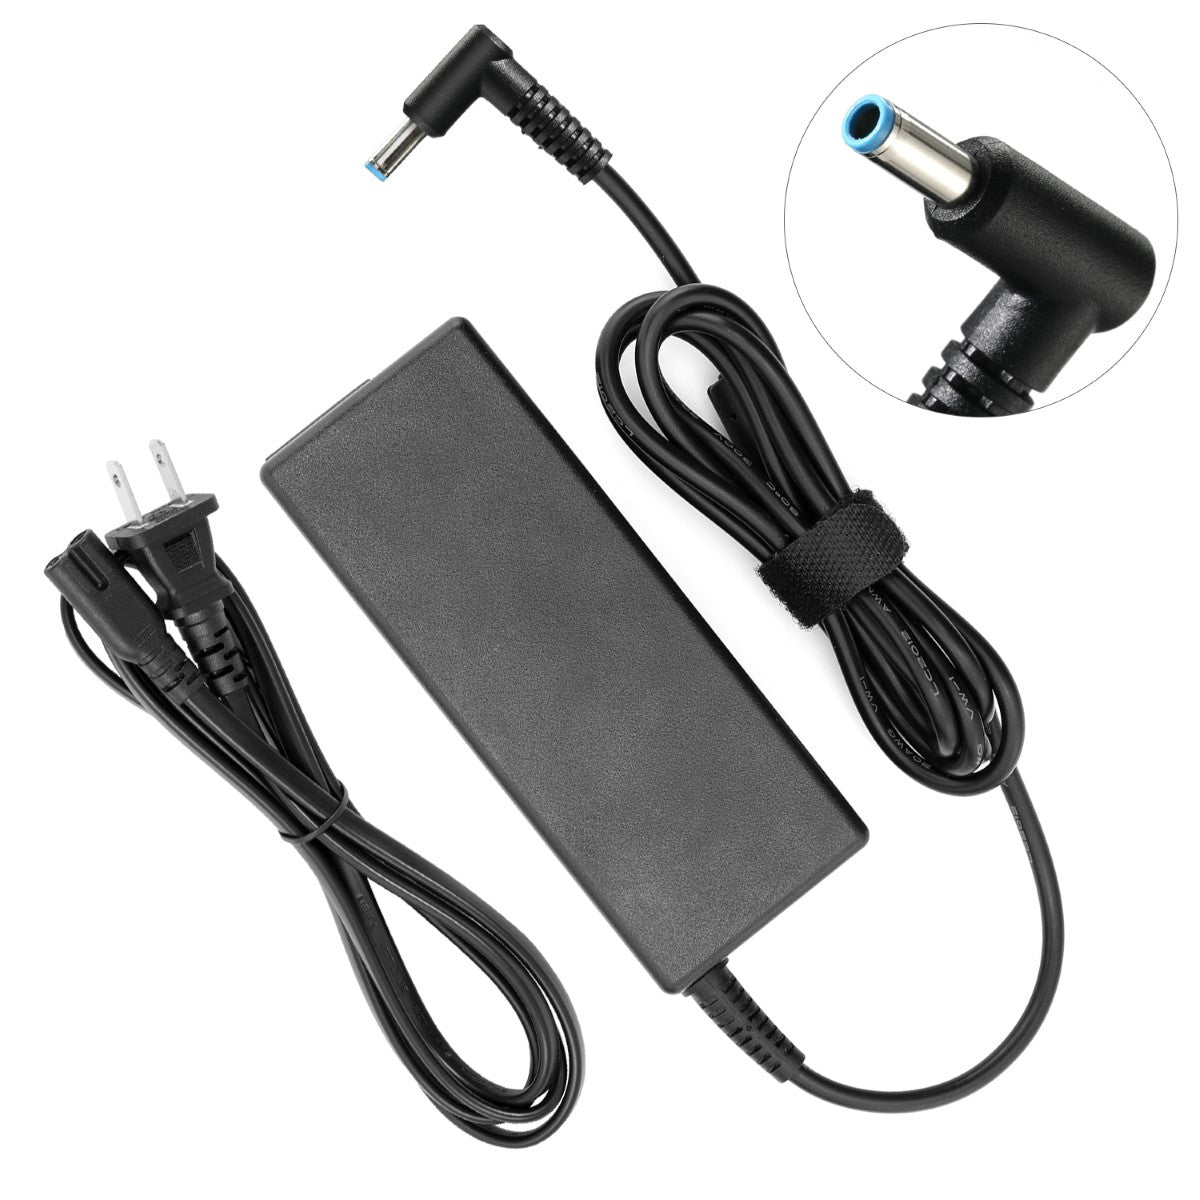 Charger for HP Pavilion x360 15-bk137cl Touch Laptop